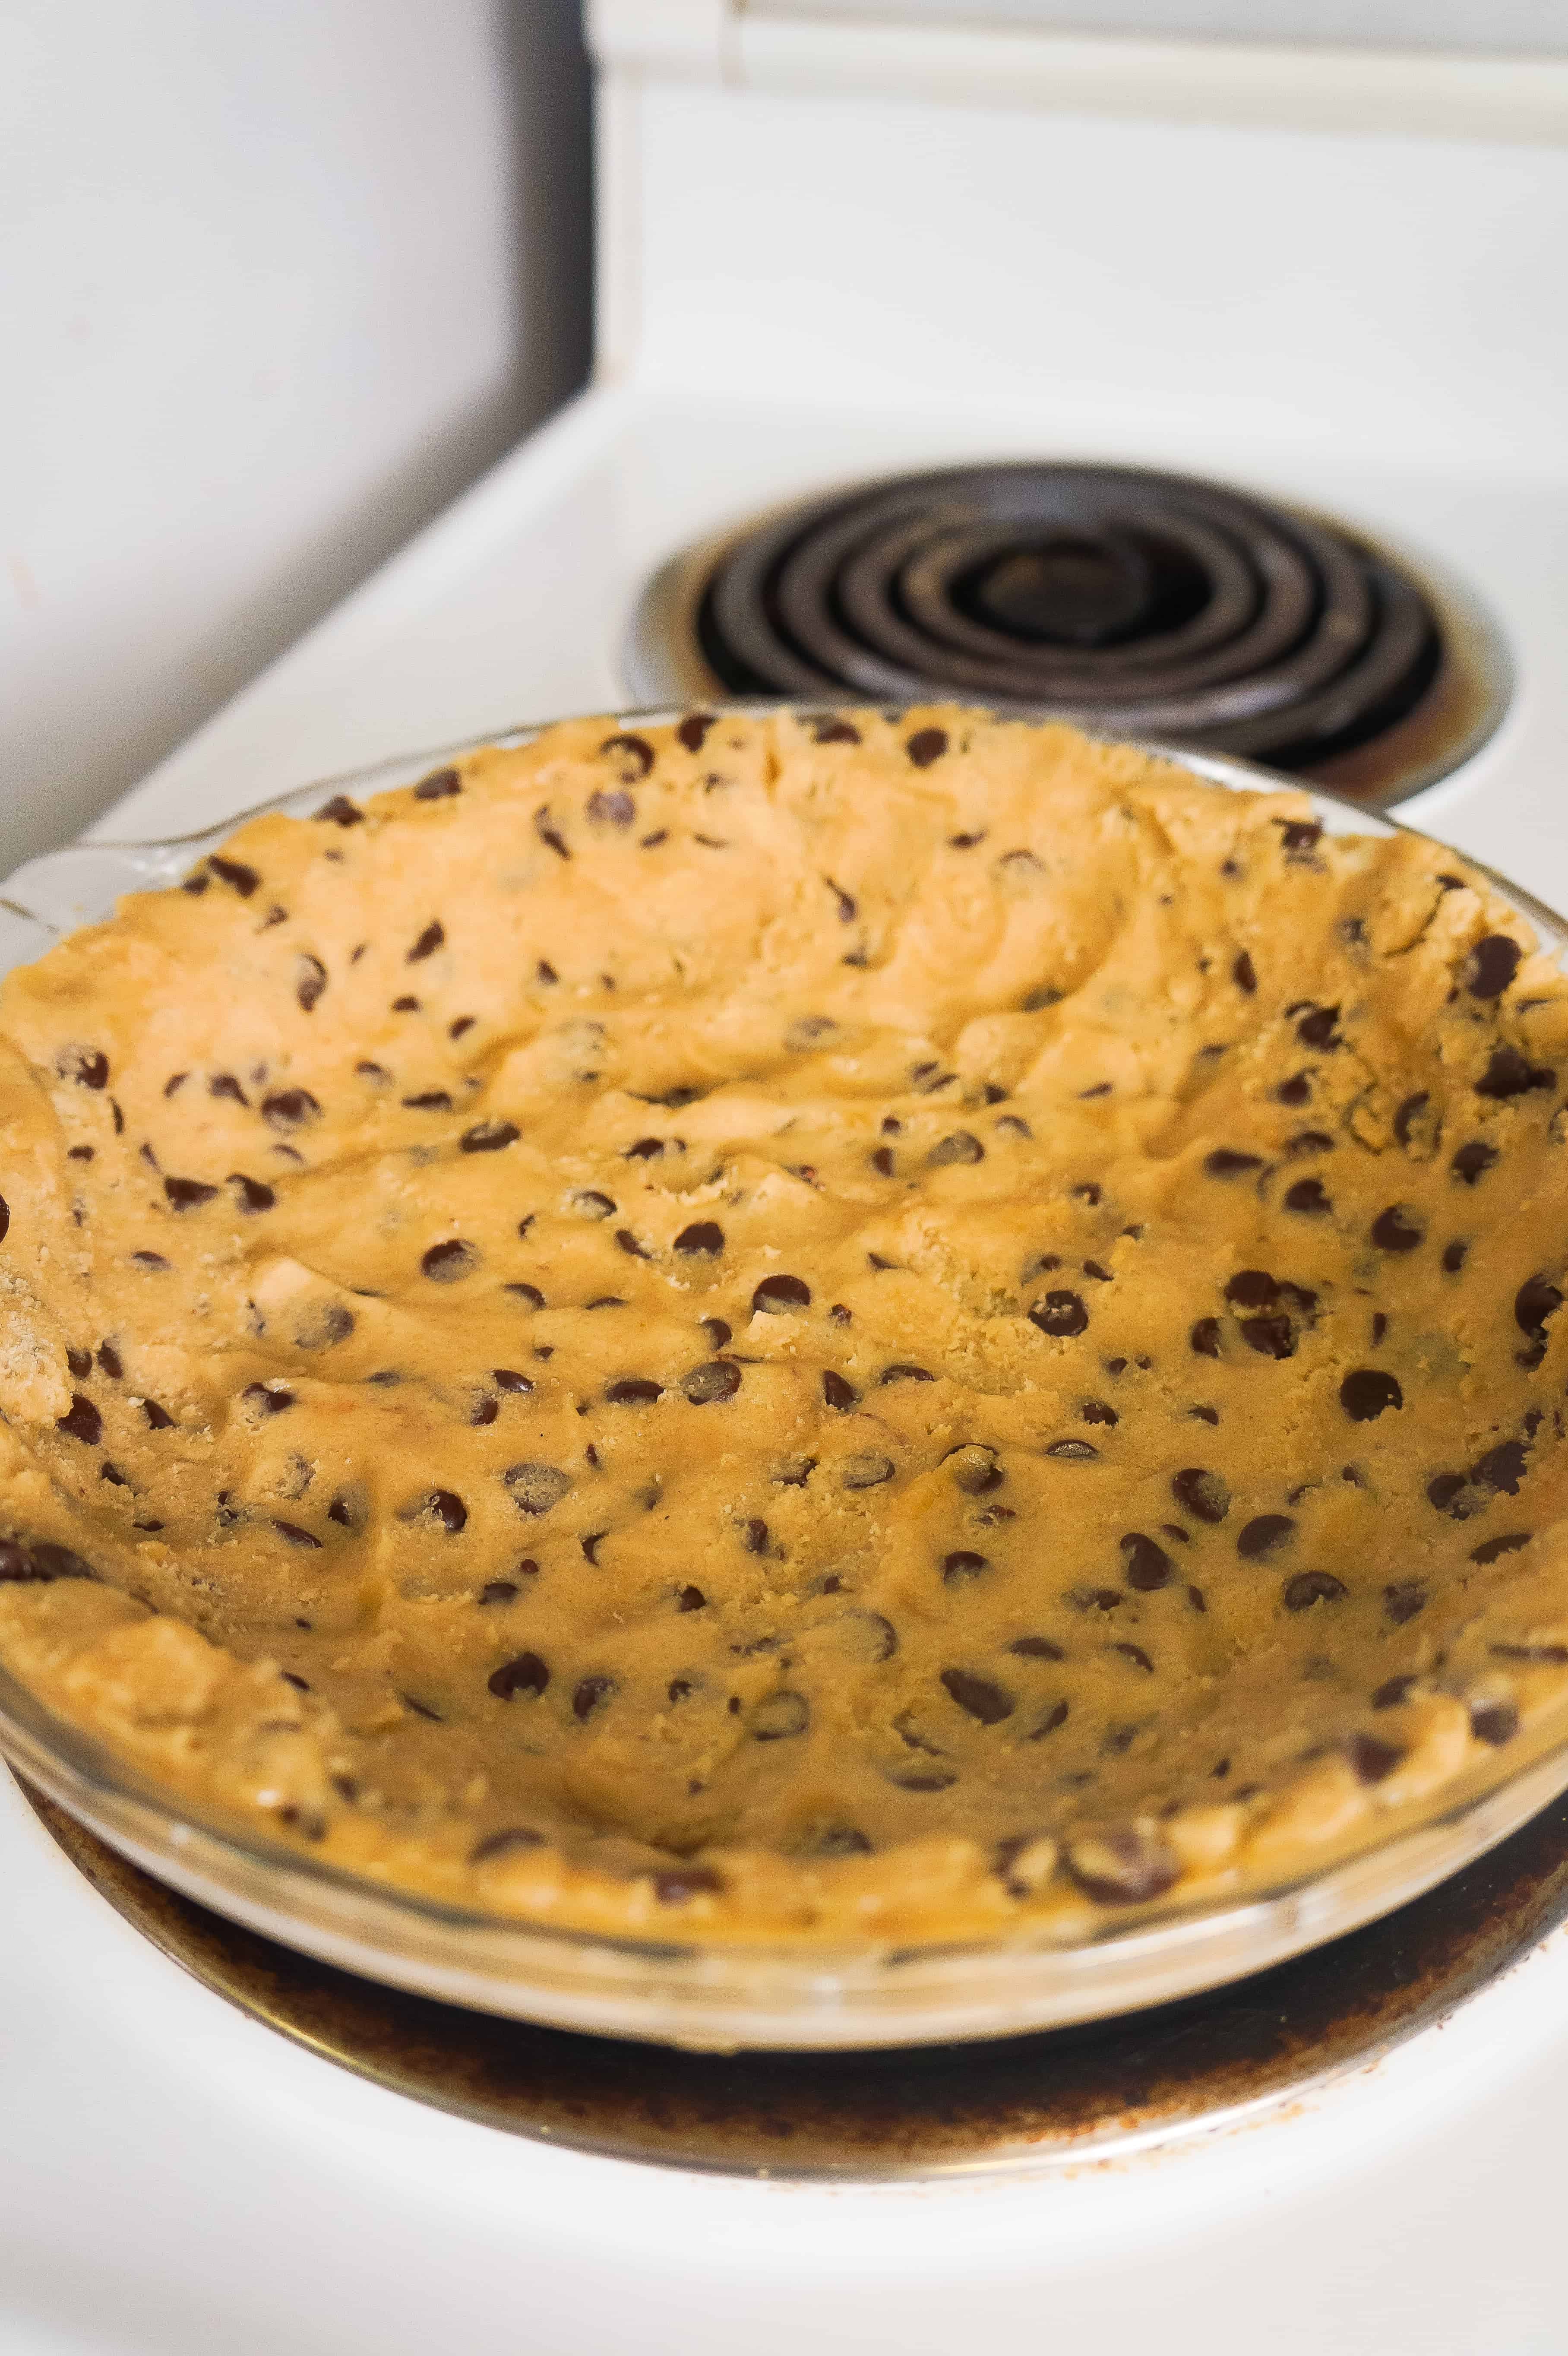 Chocolate chip cookie dough in a pie plate.